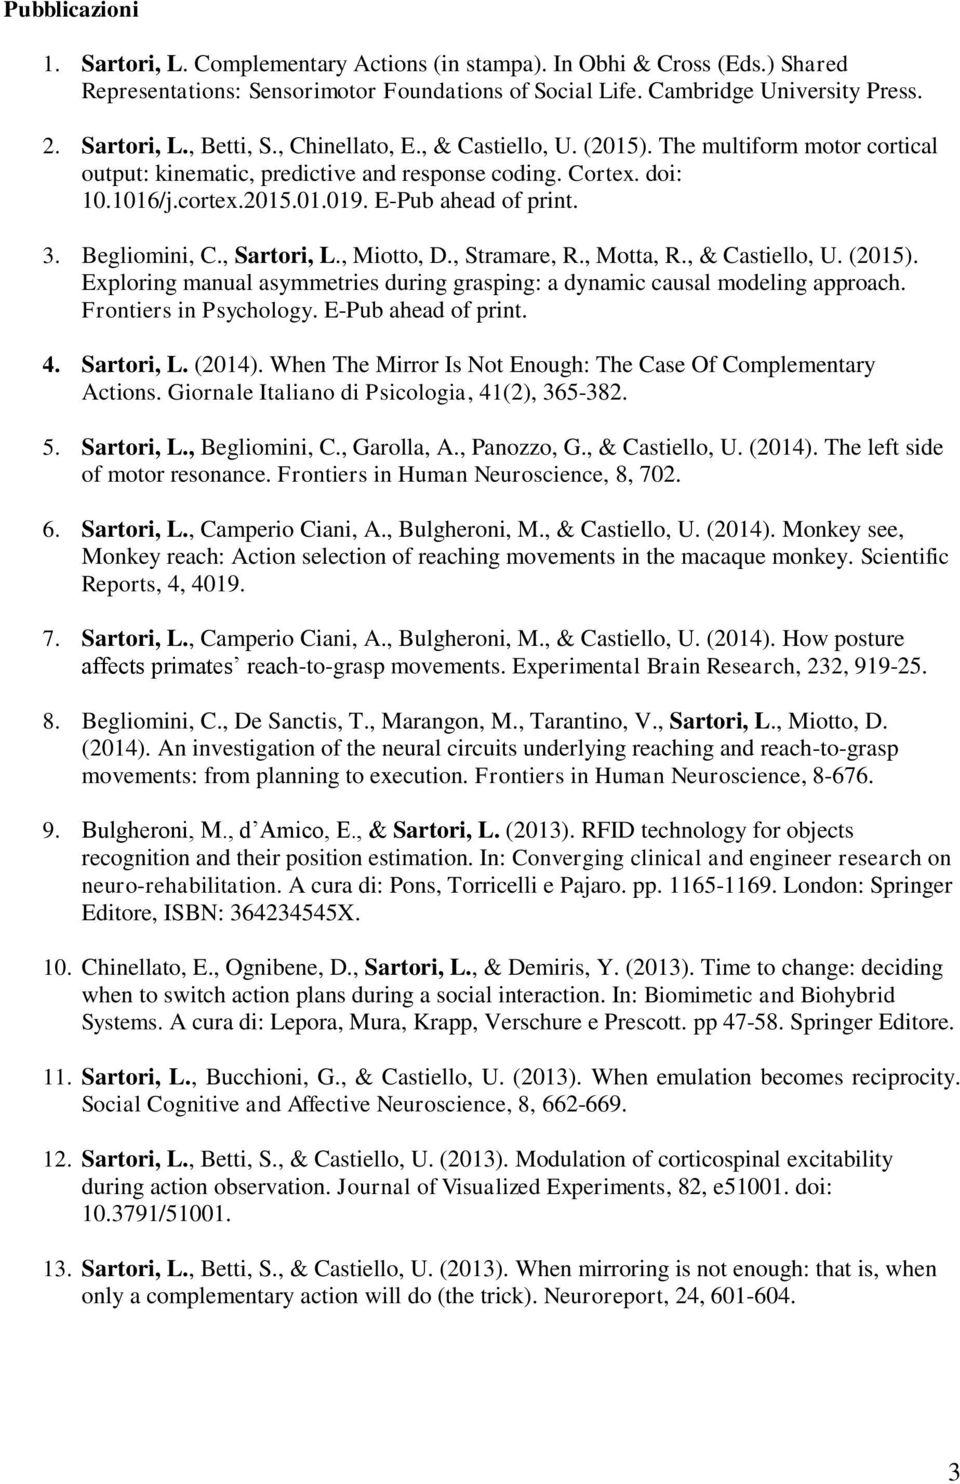 Begliomini, C., Sartori, L., Miotto, D., Stramare, R., Motta, R., & Castiello, U. (2015). Exploring manual asymmetries during grasping: a dynamic causal modeling approach. Frontiers in Psychology.